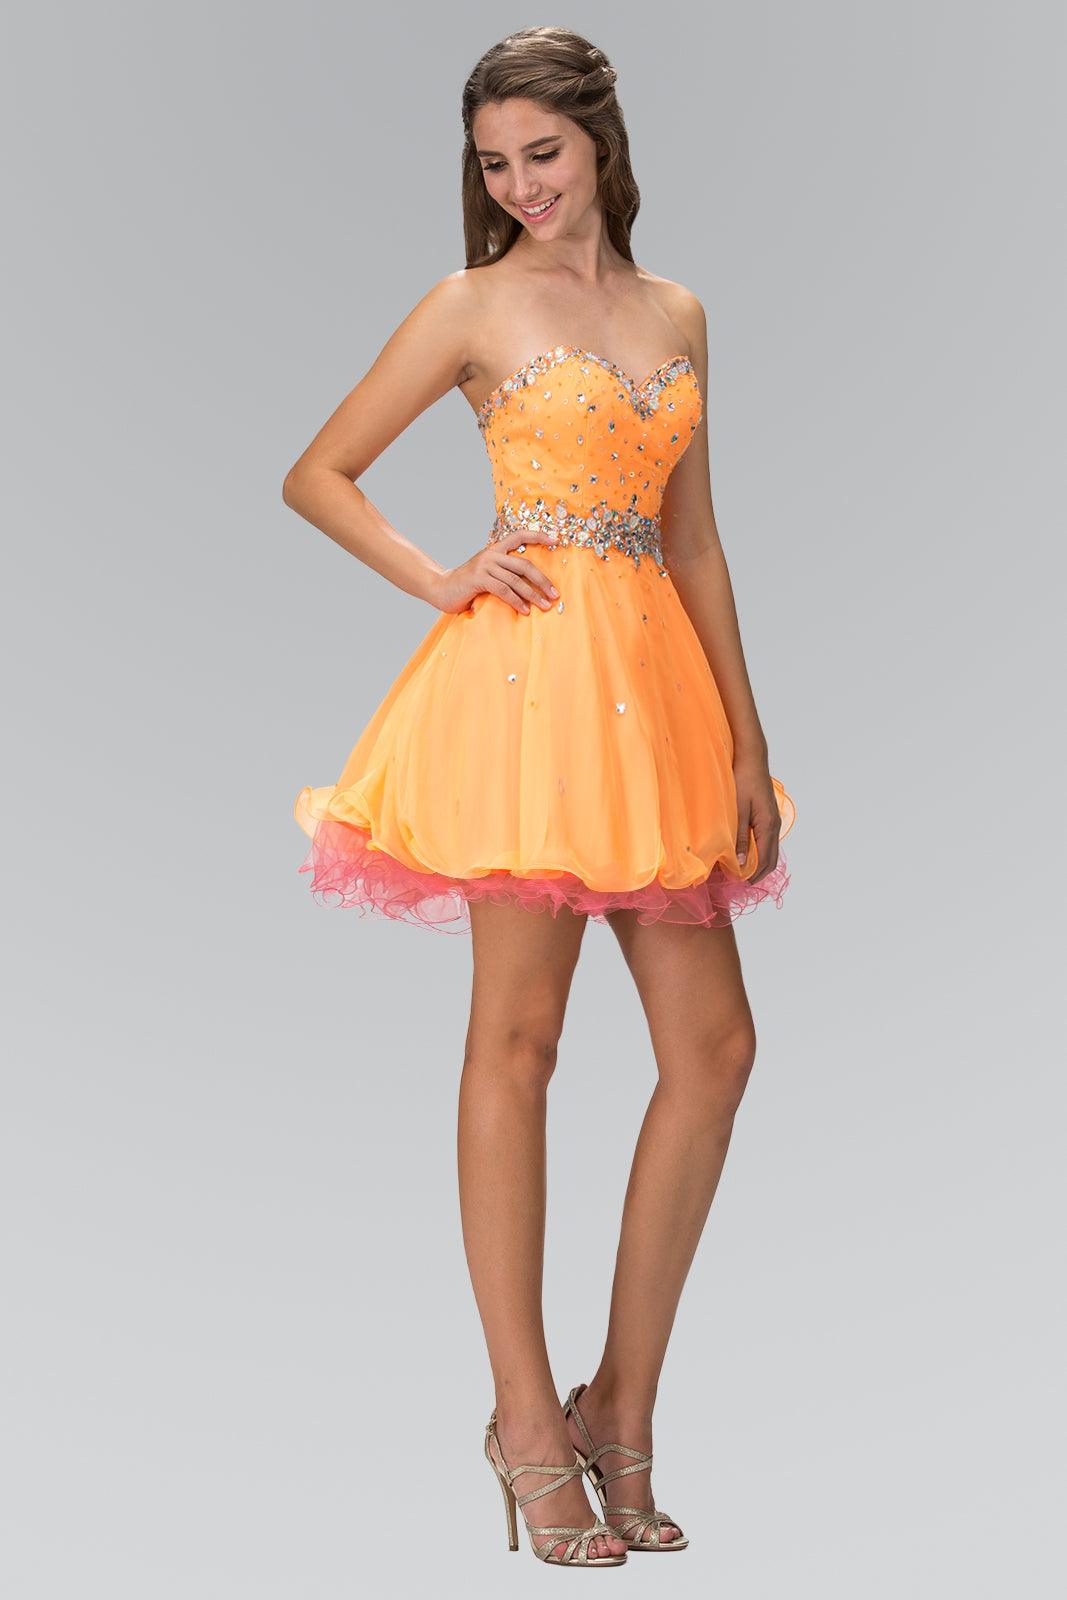 Short Strapless Homecoming Prom Dress - The Dress Outlet